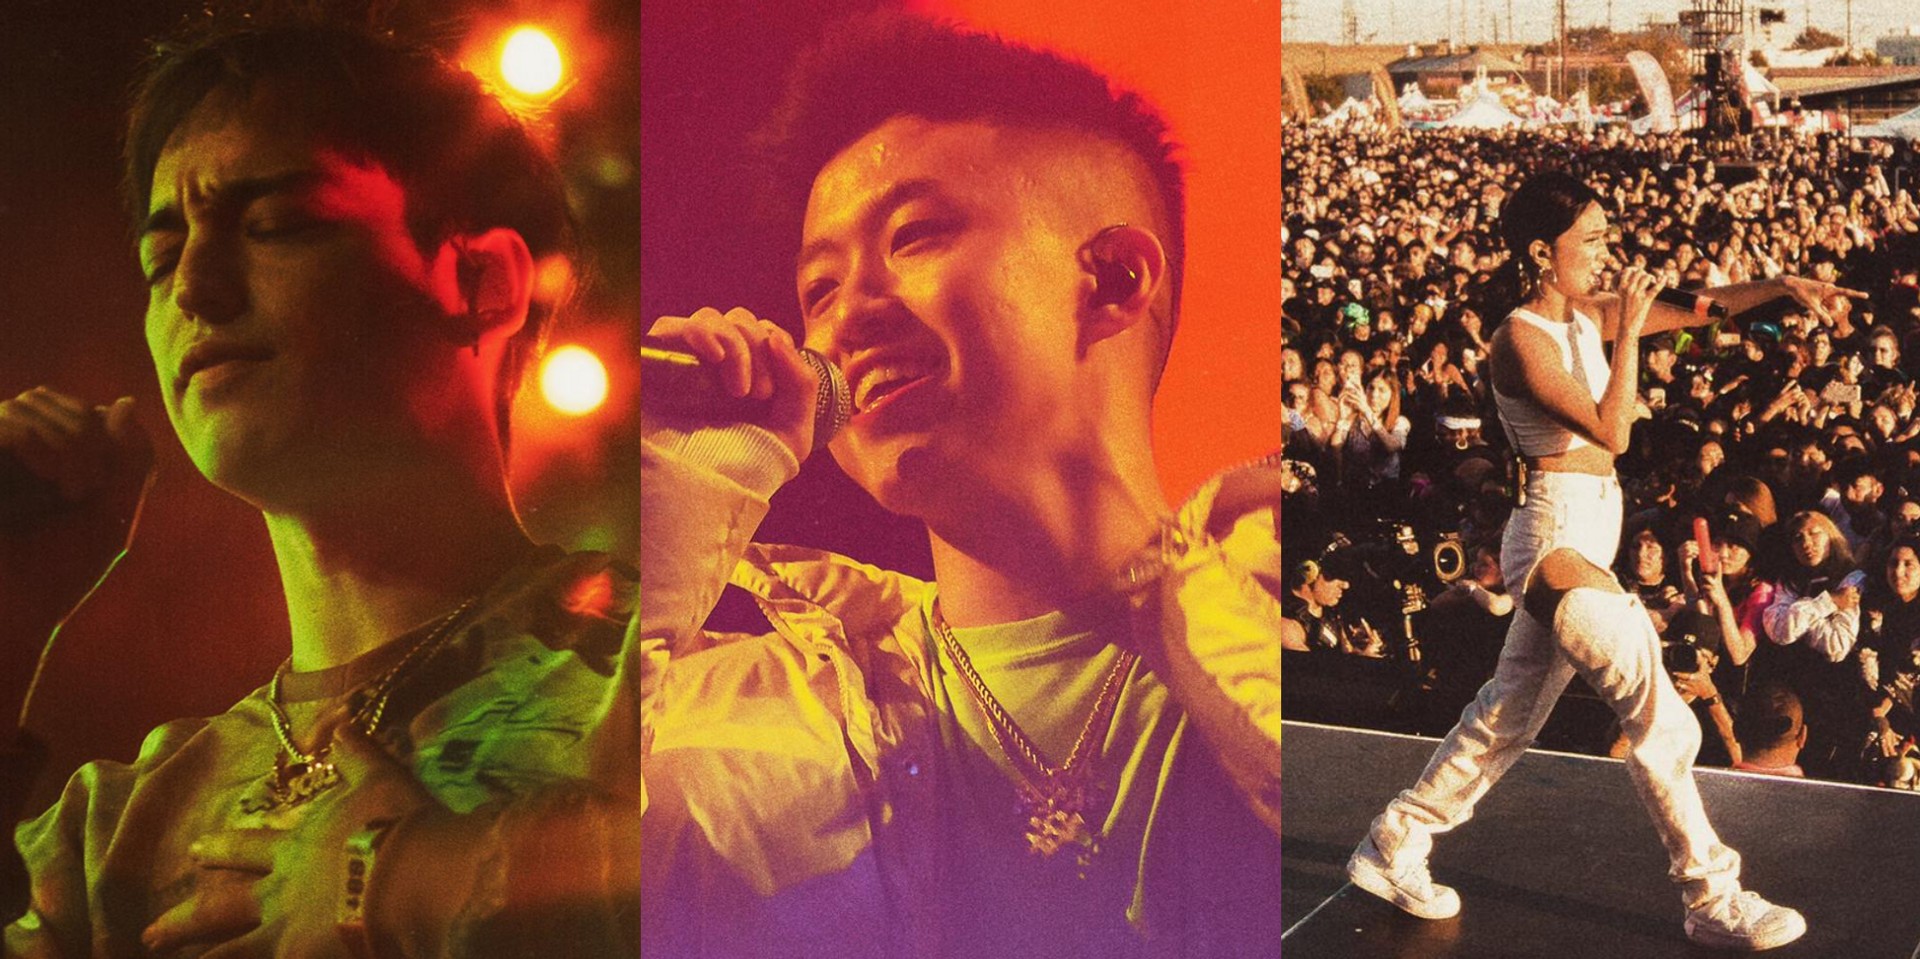 88rising Head in the Clouds Festival will arrive in Jakarta next year, lineup includes Rich Brian, Joji, NIKI and more 